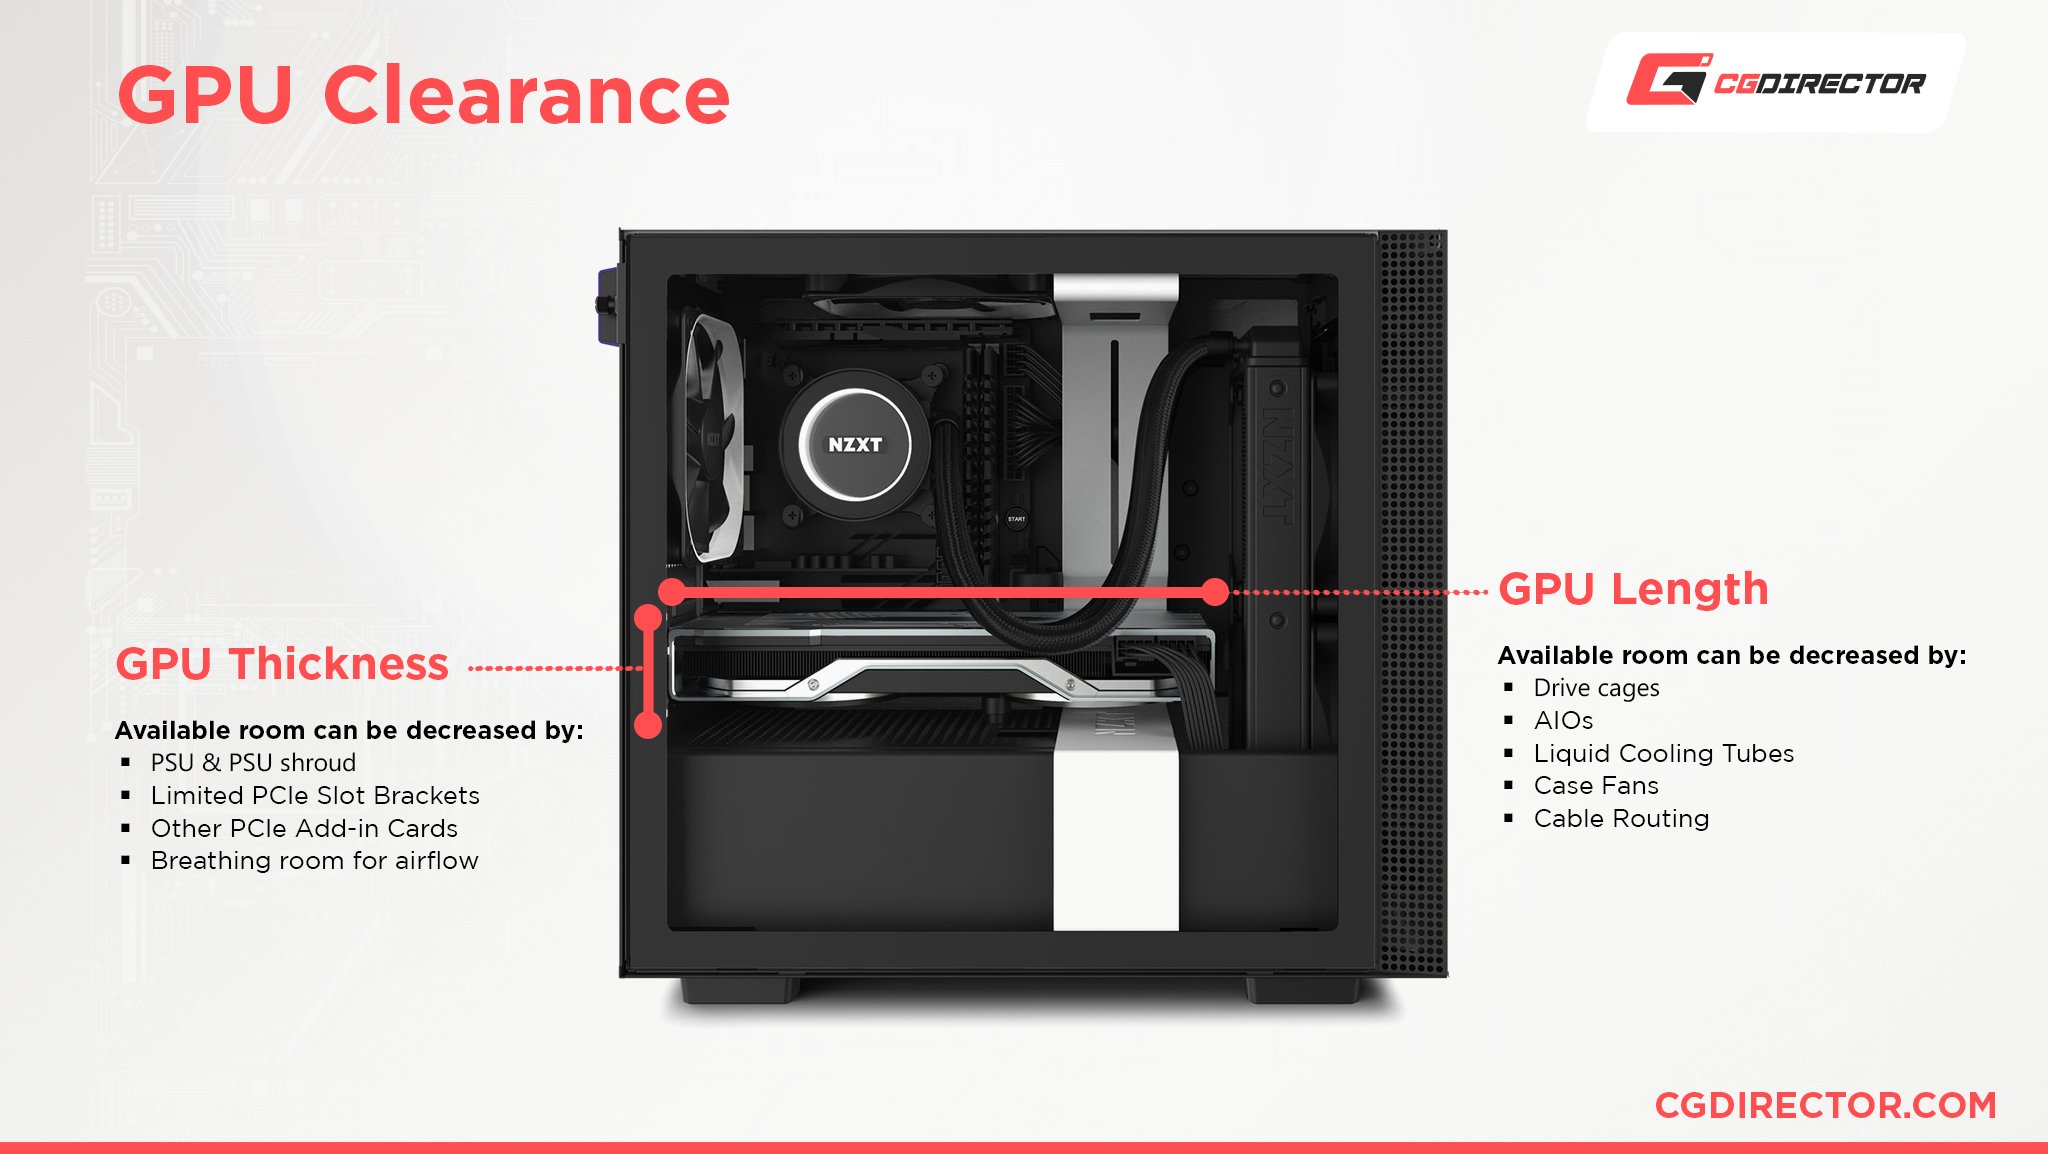 GPU Clearance Explained - Woll my GPU Fit into my Case